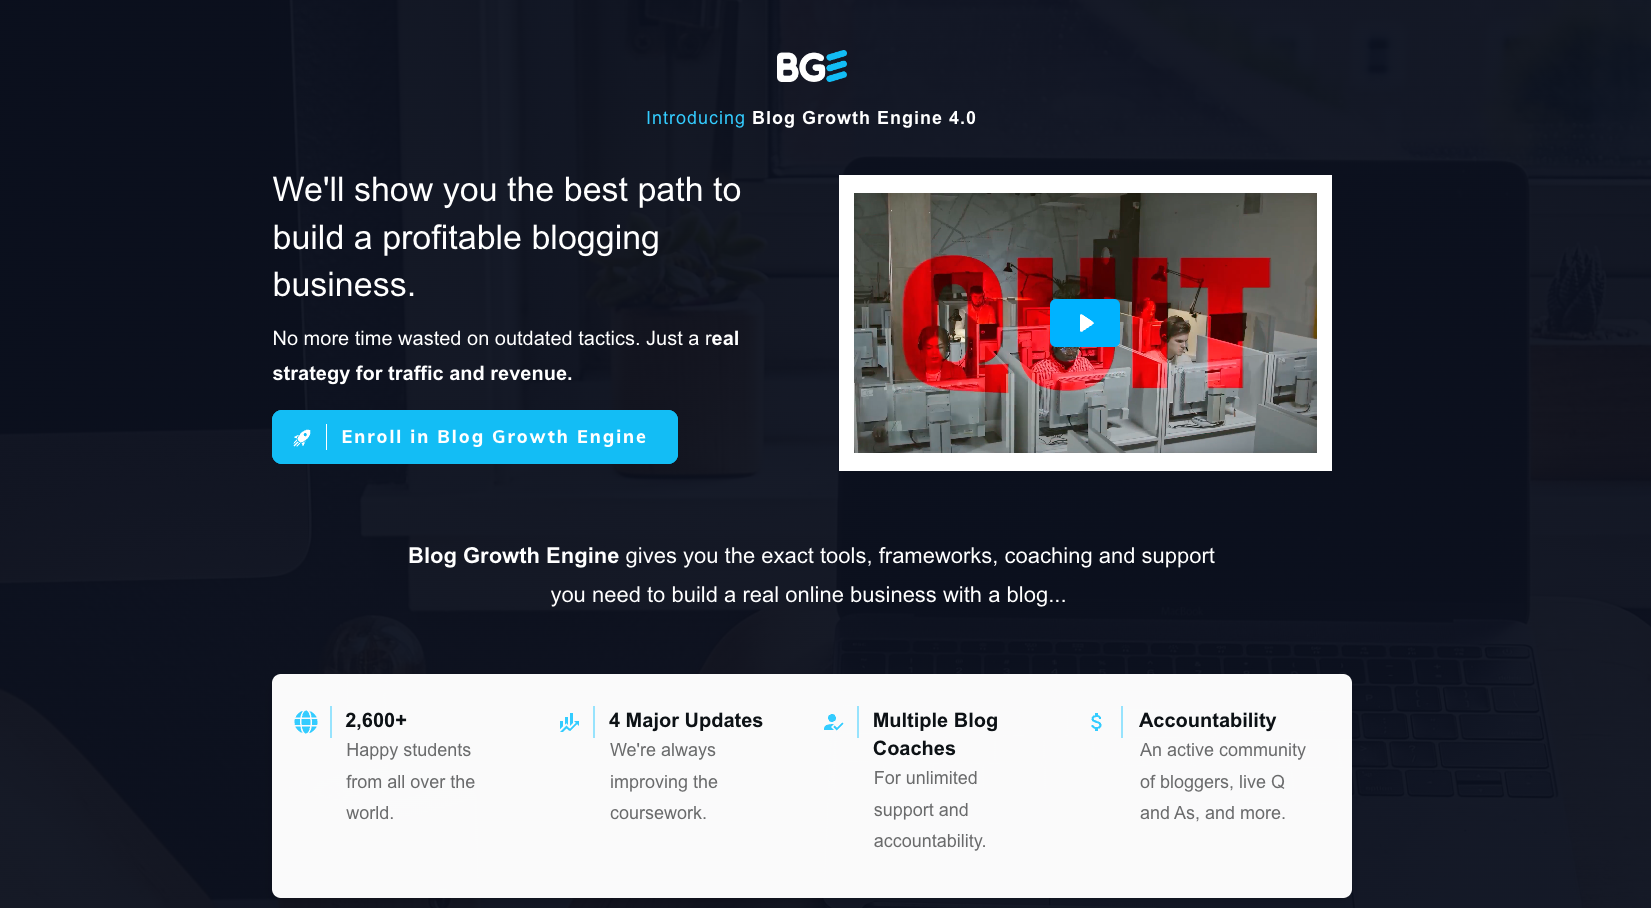 Blog Growth Engine online business course